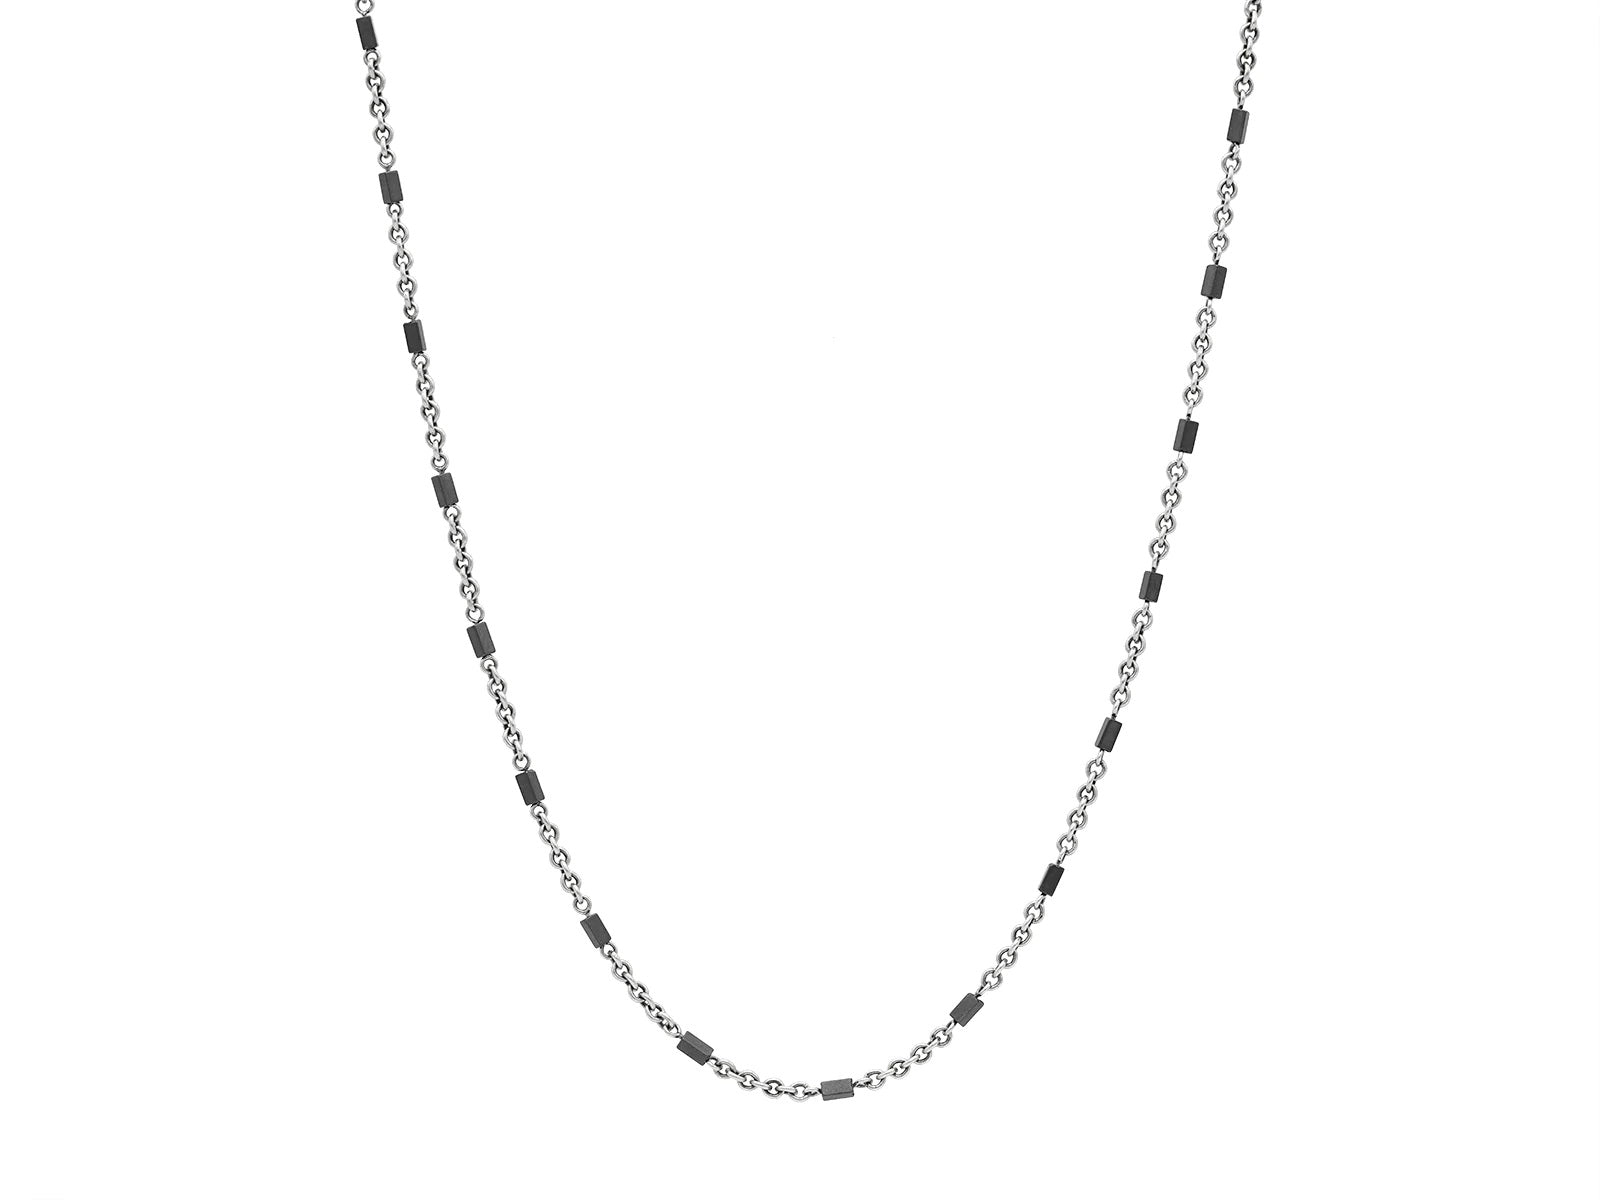 ARTISAN STERLING SILVER STATION NECKLACE, WITH HEMATITE